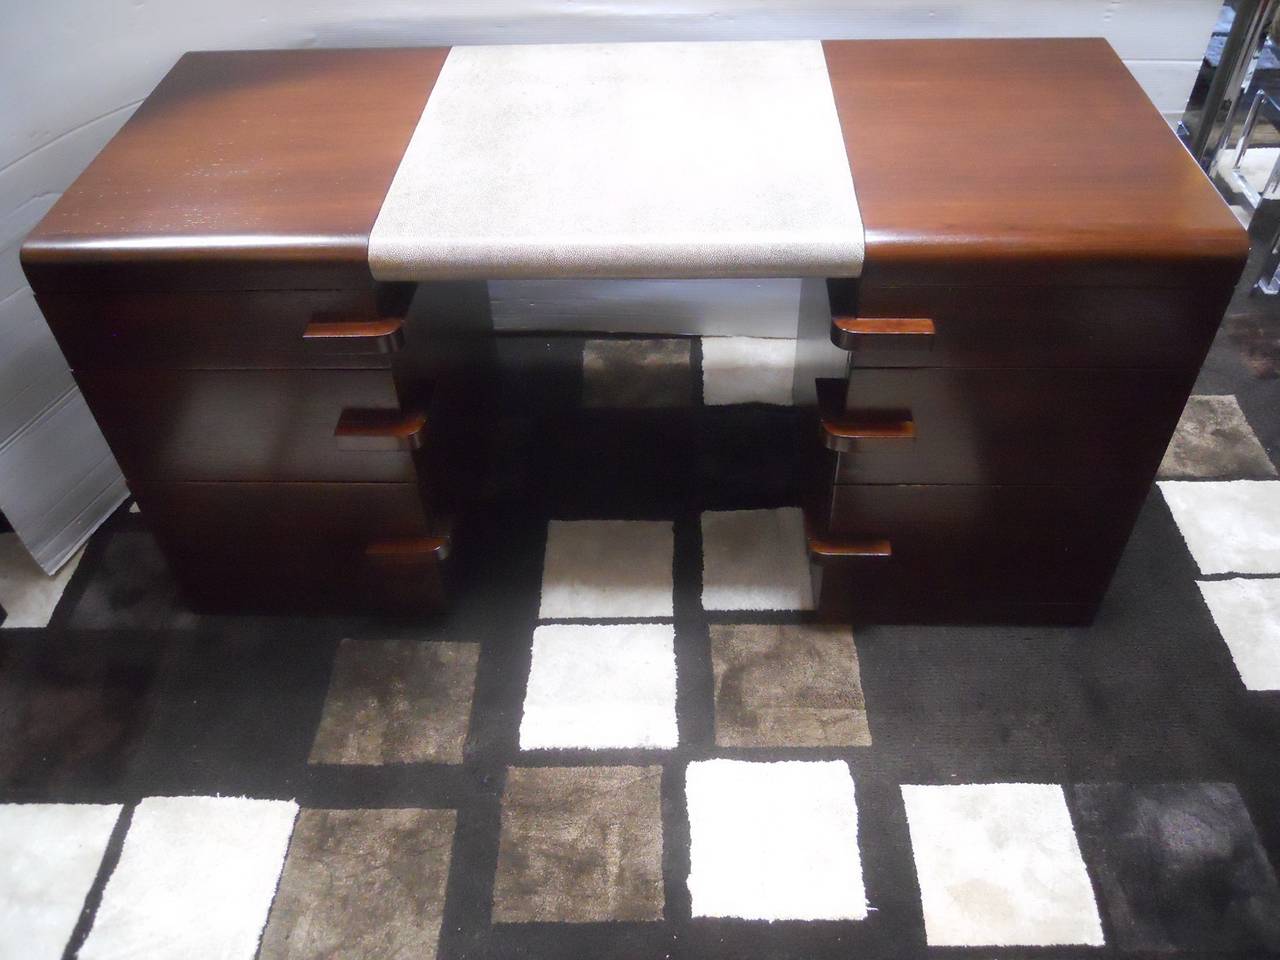 Sophisticated Gilbert Rohde for Herman Miller desk.
Newly refinished.
Faux shagreen.
American walnut outside body and mahogany inside all six drawers.